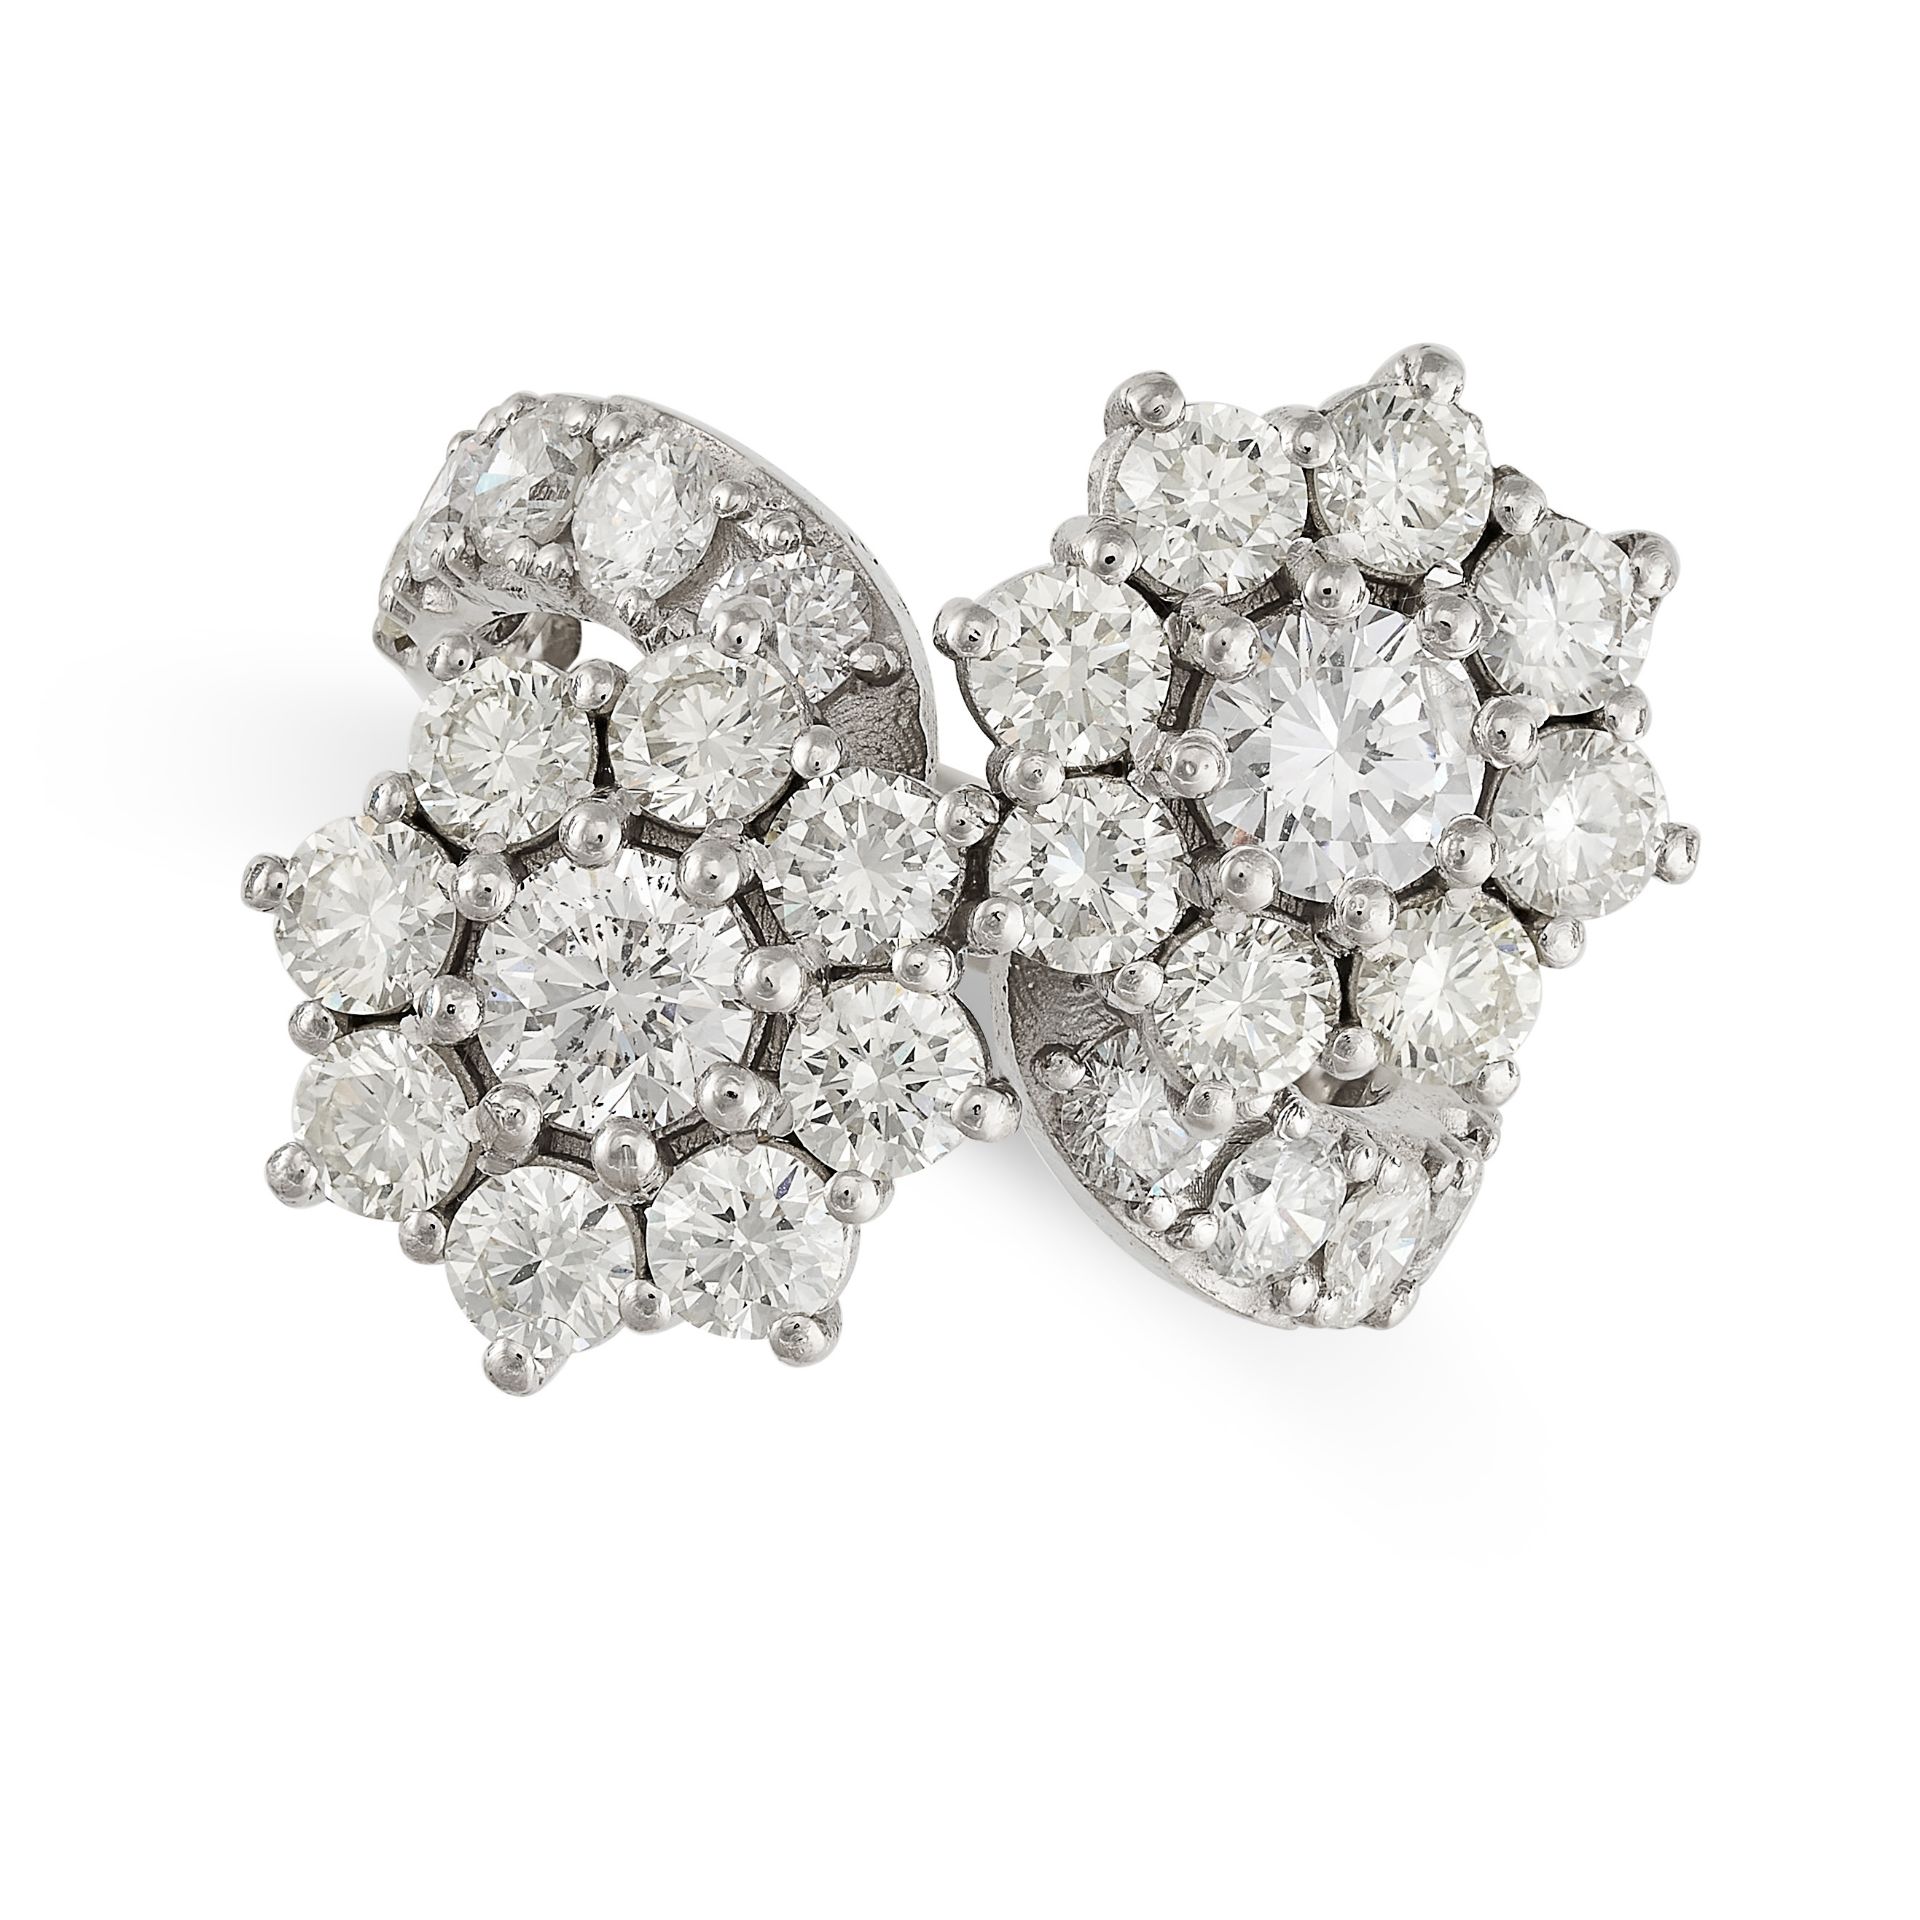 A DIAMOND CLUSTER TOI ET MOI RING the stylised band with two clusters of round brilliant cut